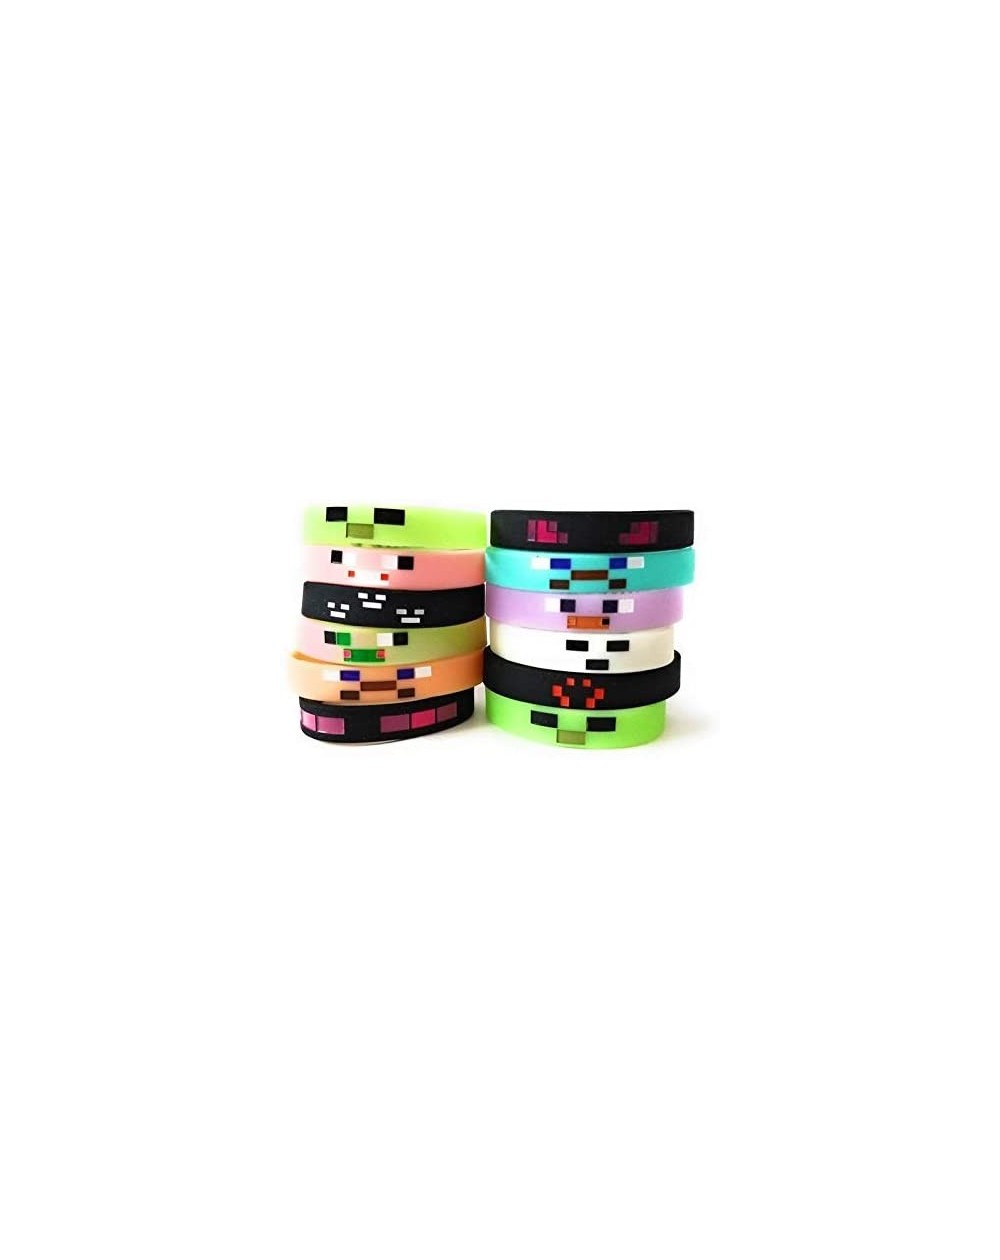 Party Favors MINING PIXELATED GLOW IN THE DARK Bracelets Wristbands Kids Birthday Party Favors Supplies Video Game (12 pack) ...